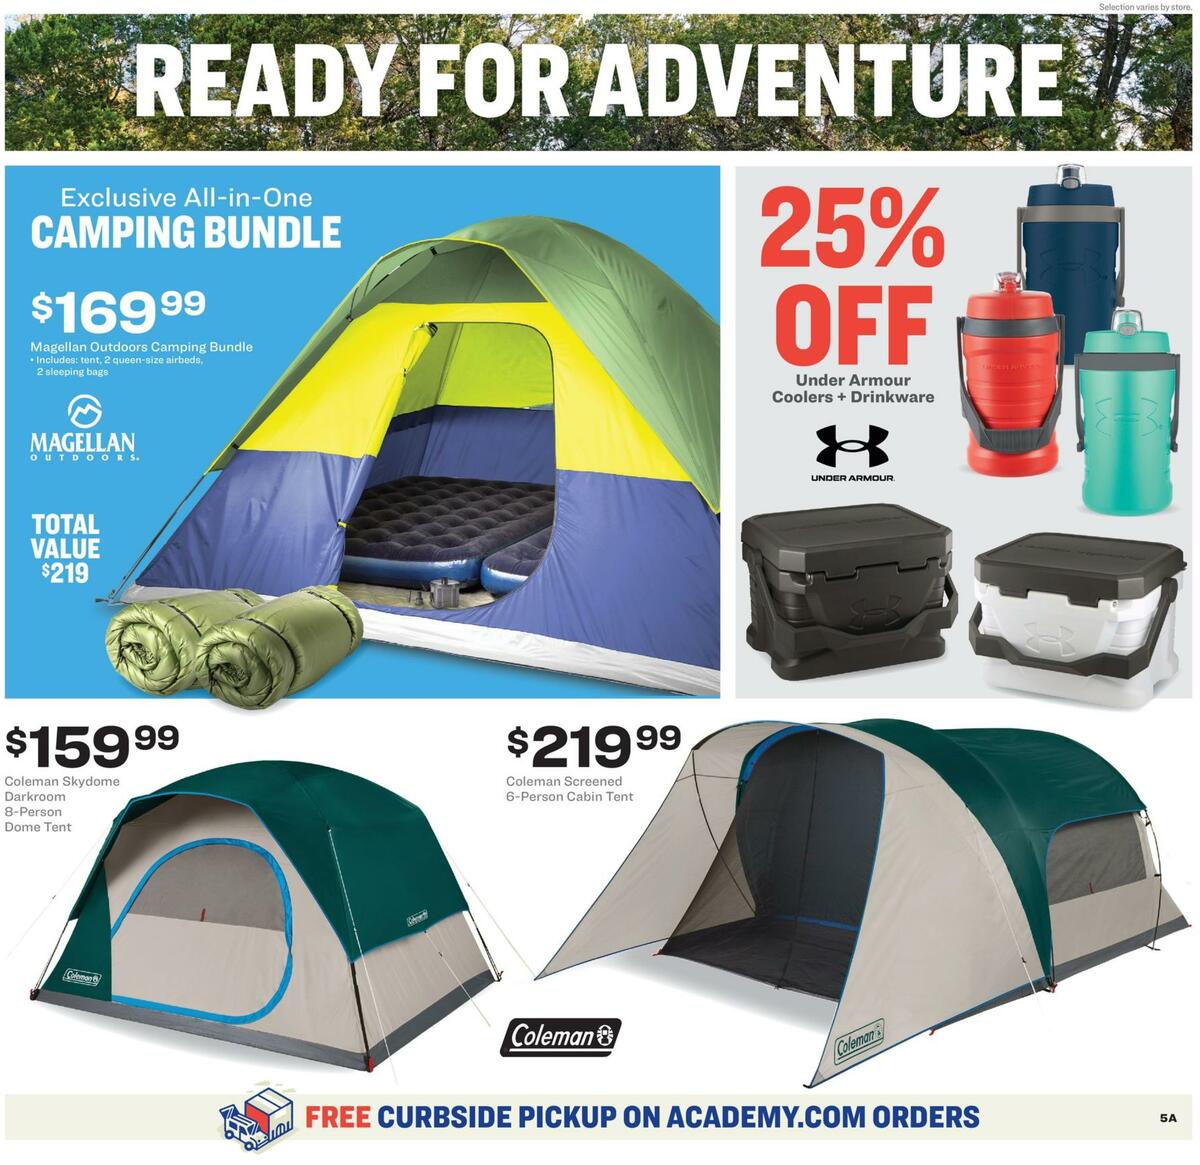 Academy Sports + Outdoors Weekly Ad from July 6